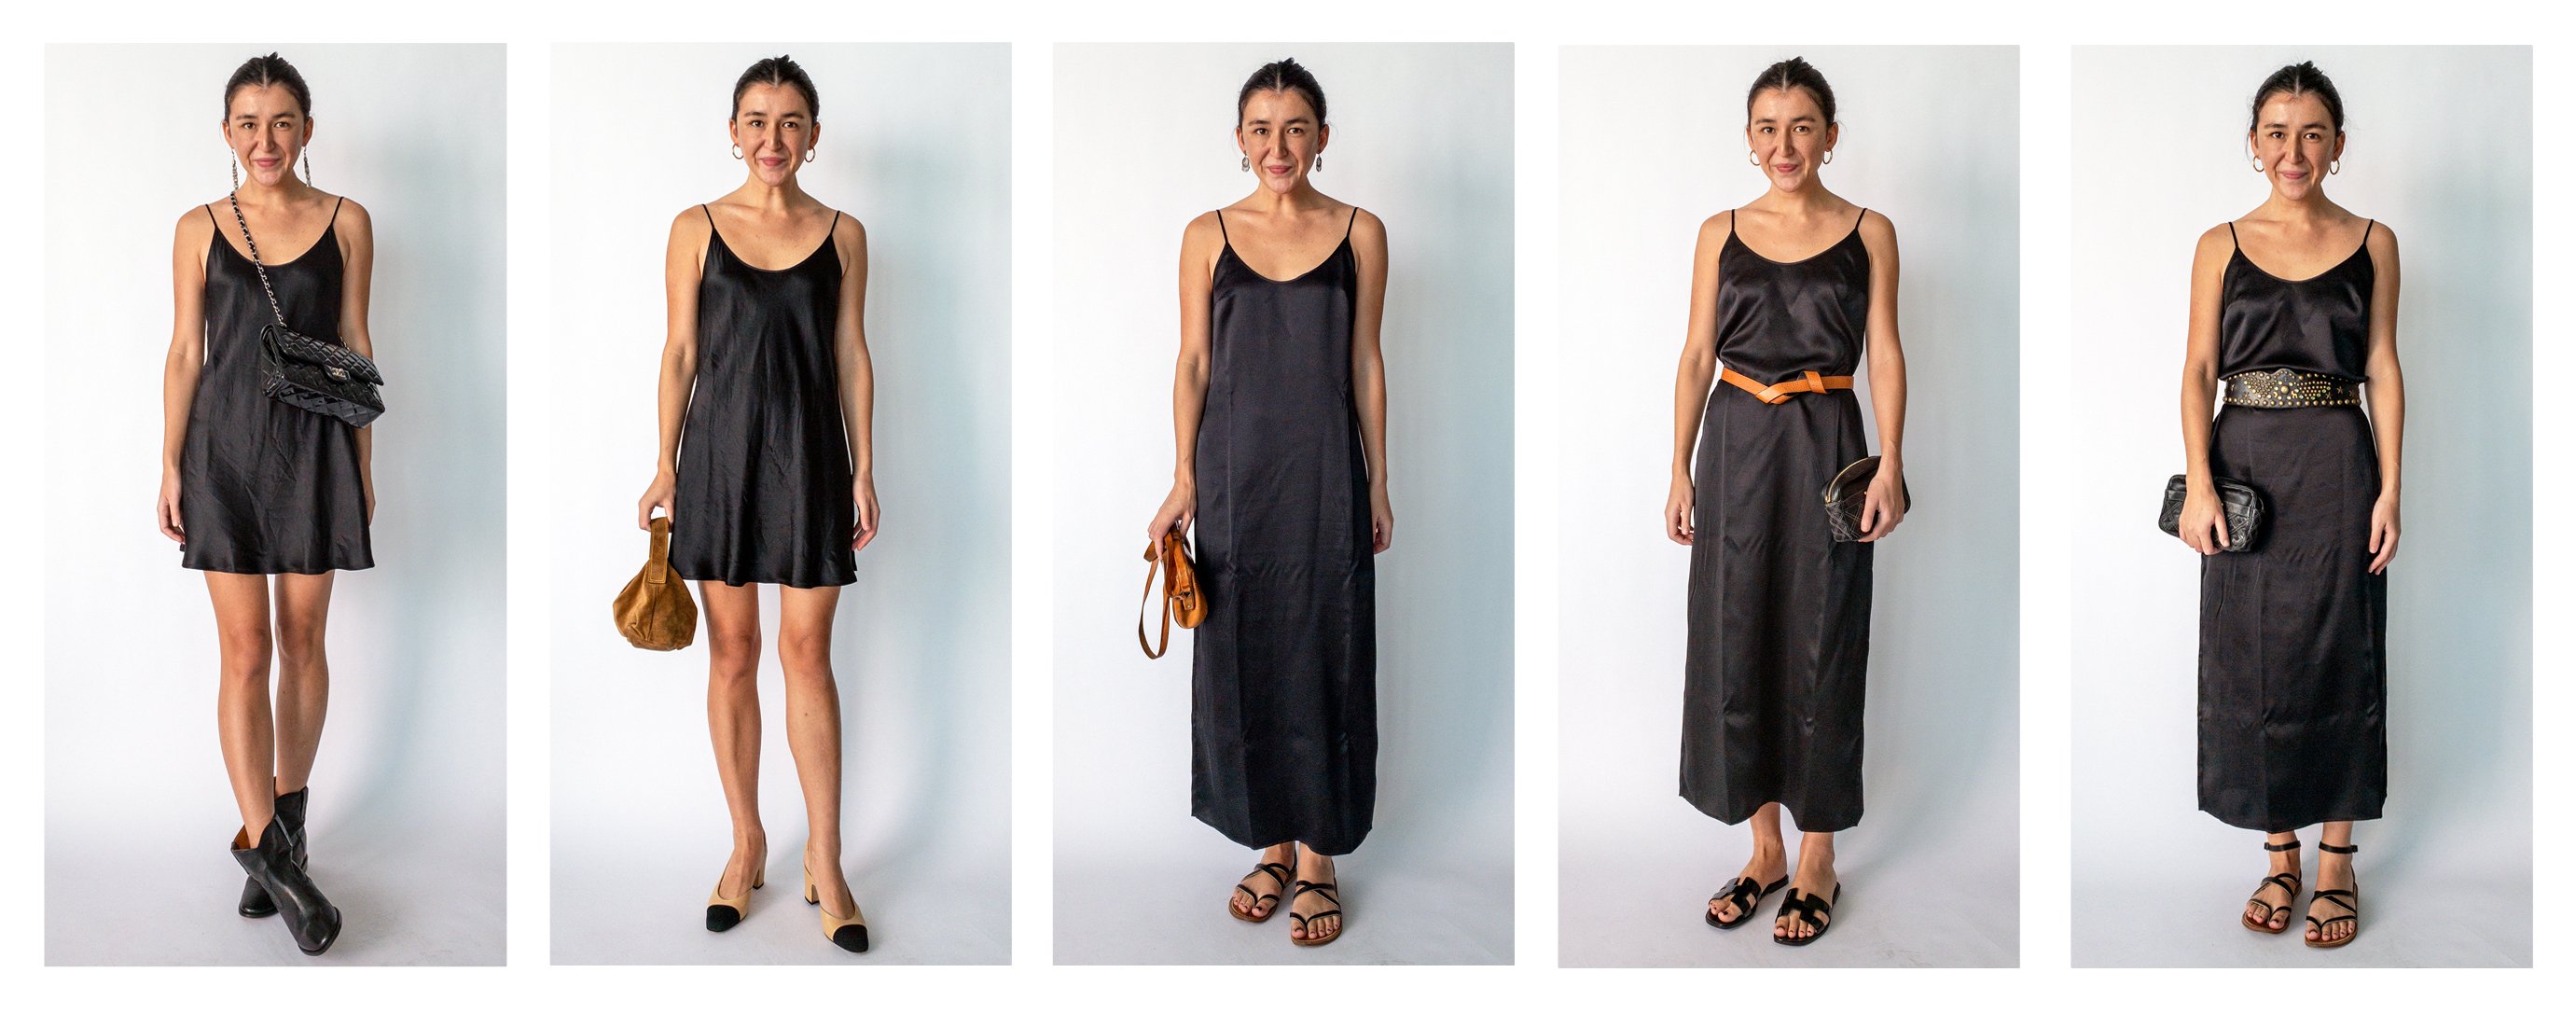 Slip dress outfits